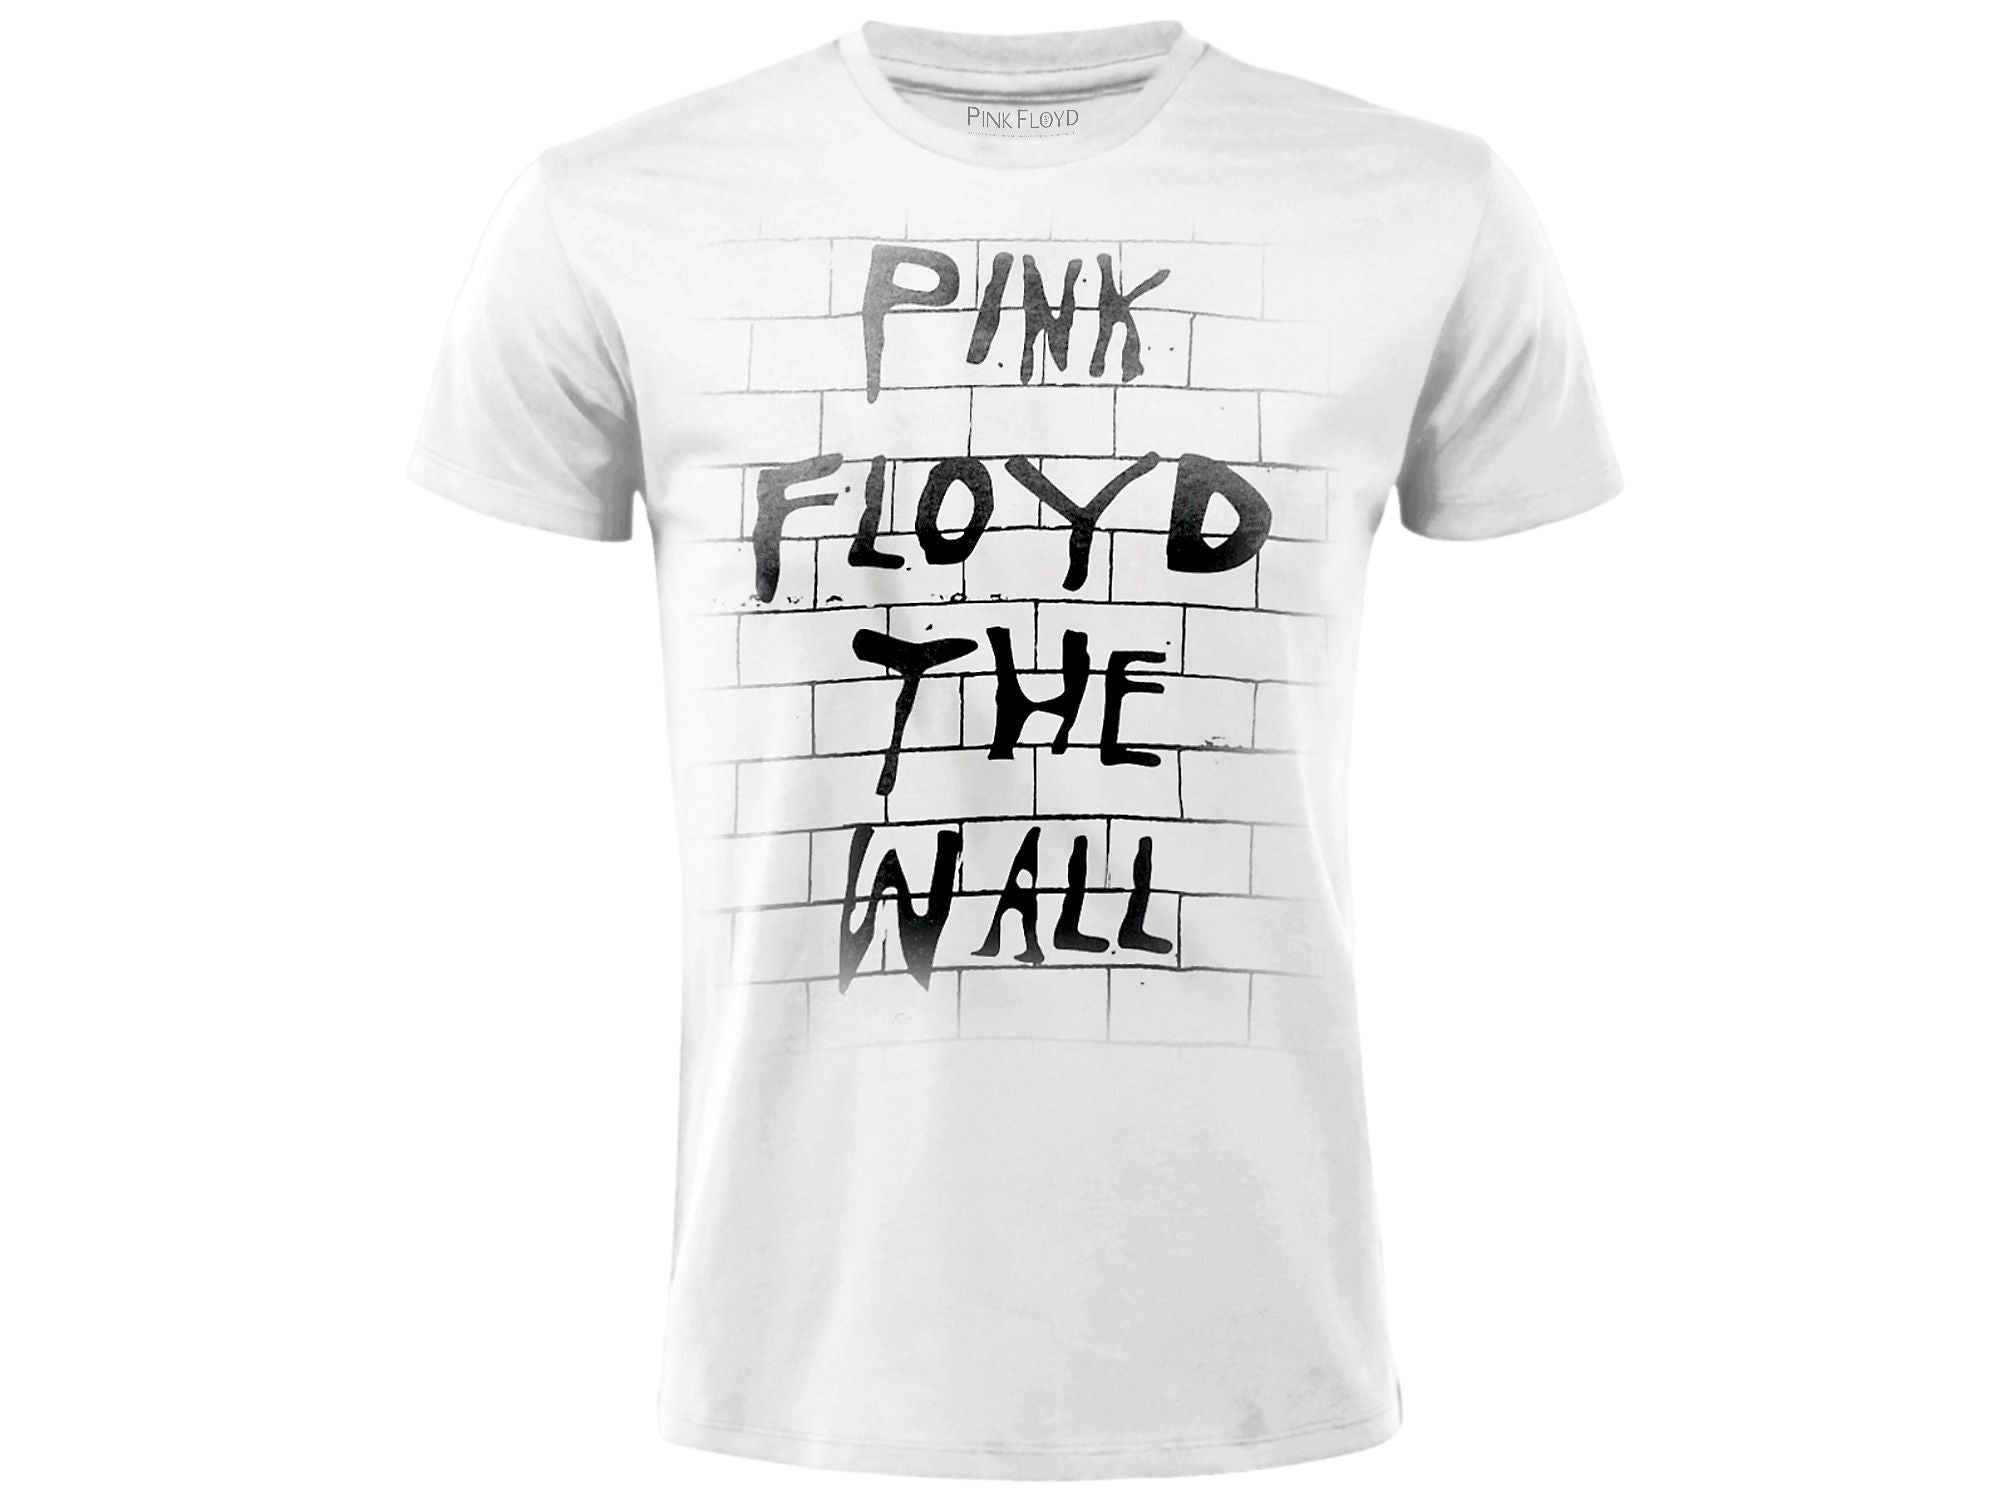 PINK FLOYD : THE WALL T-shirt S bianca - Disponibile in 2/3 giorni lavorativi